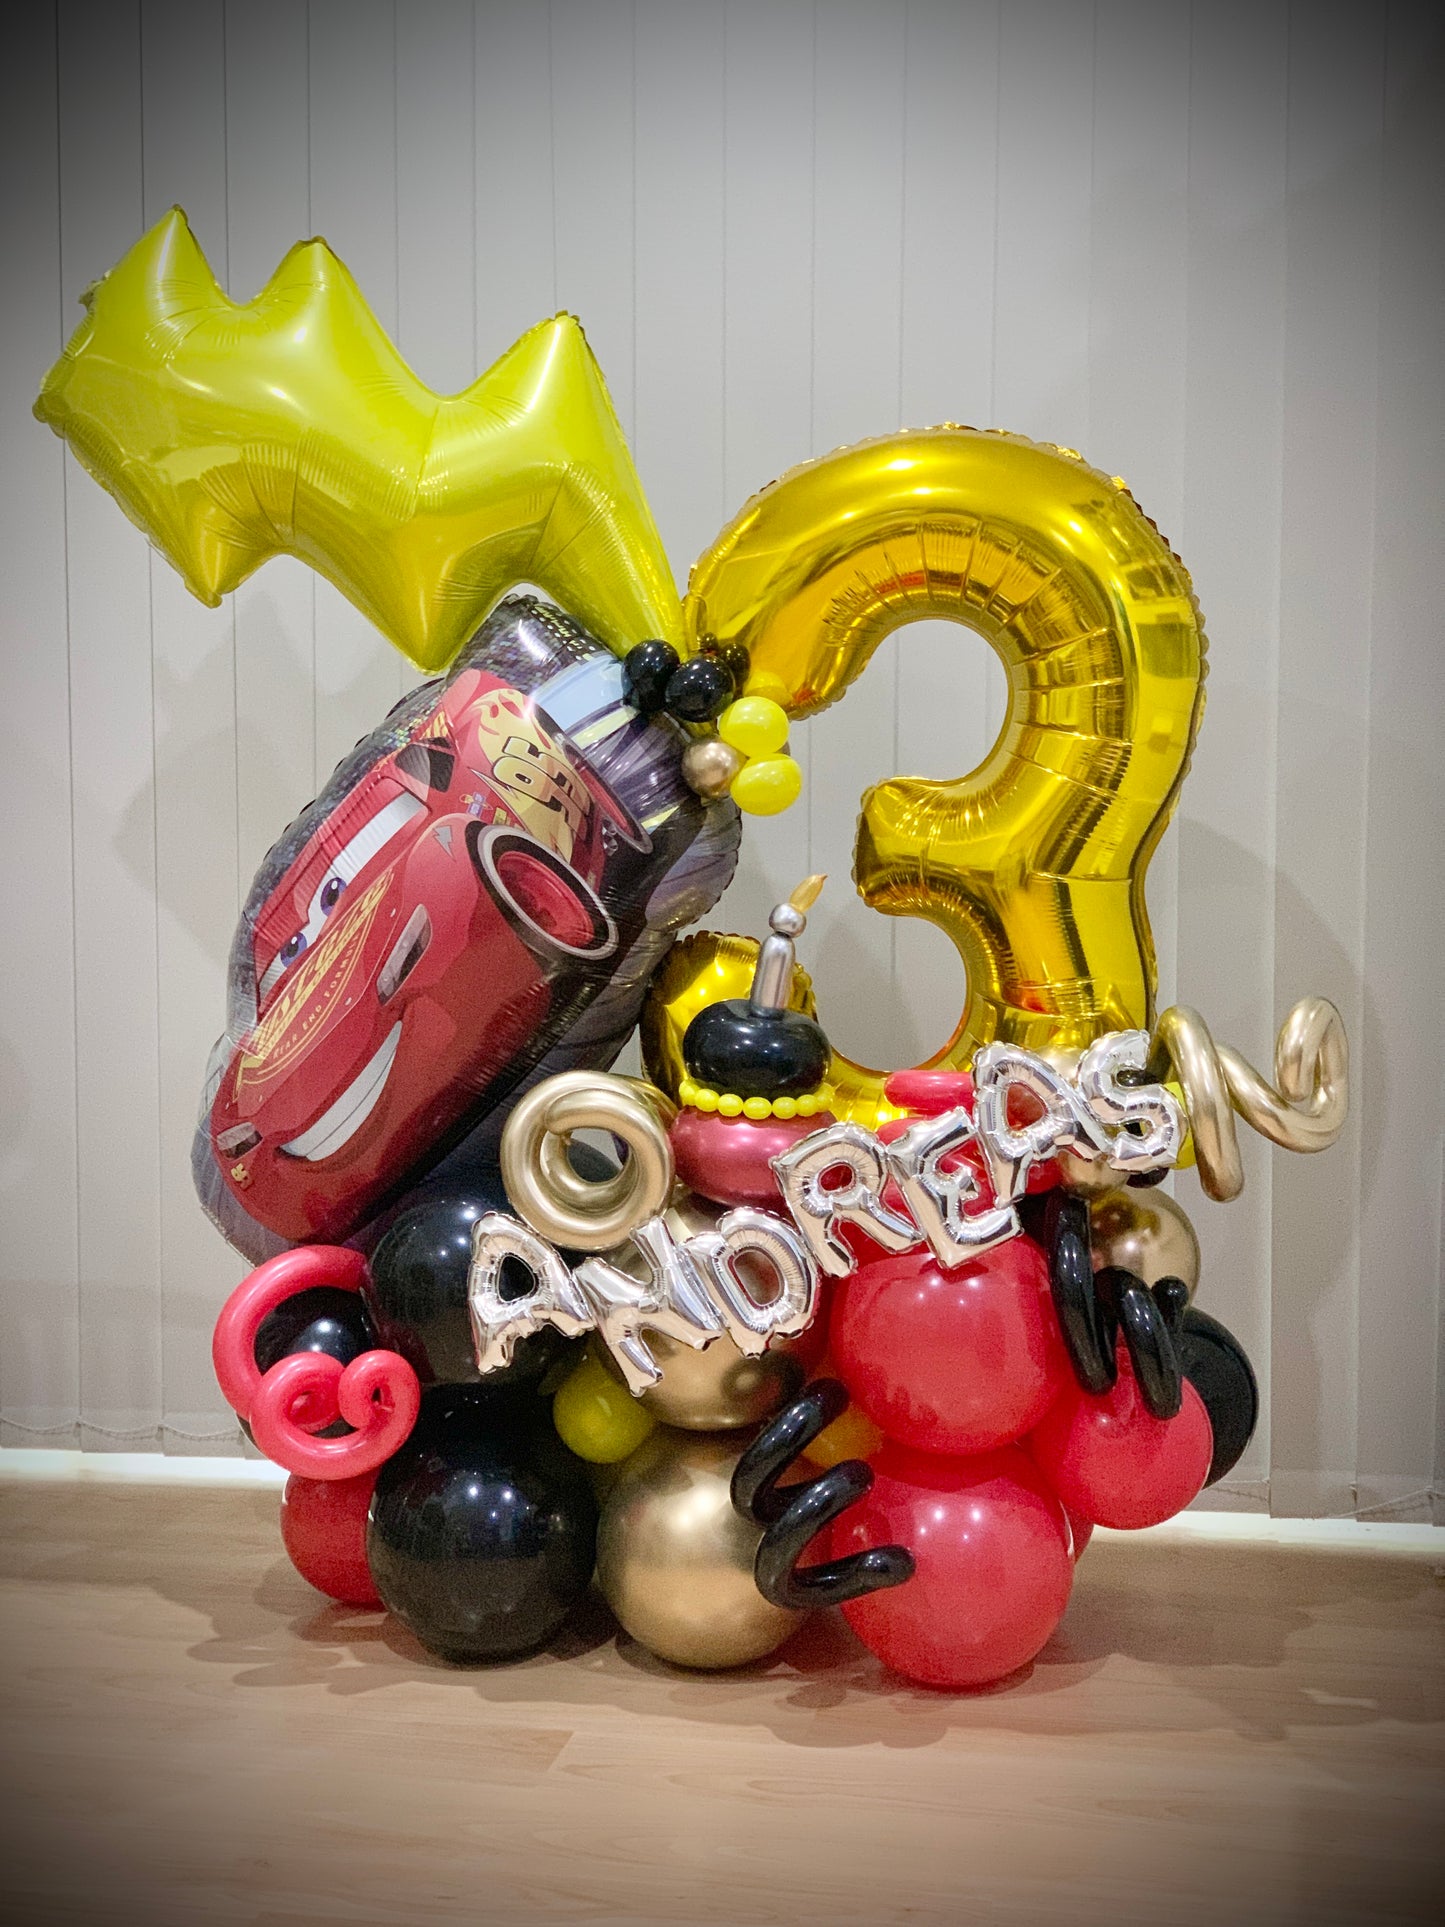 Andreas’s 3rd Lightning McQueen Balloons Marquee